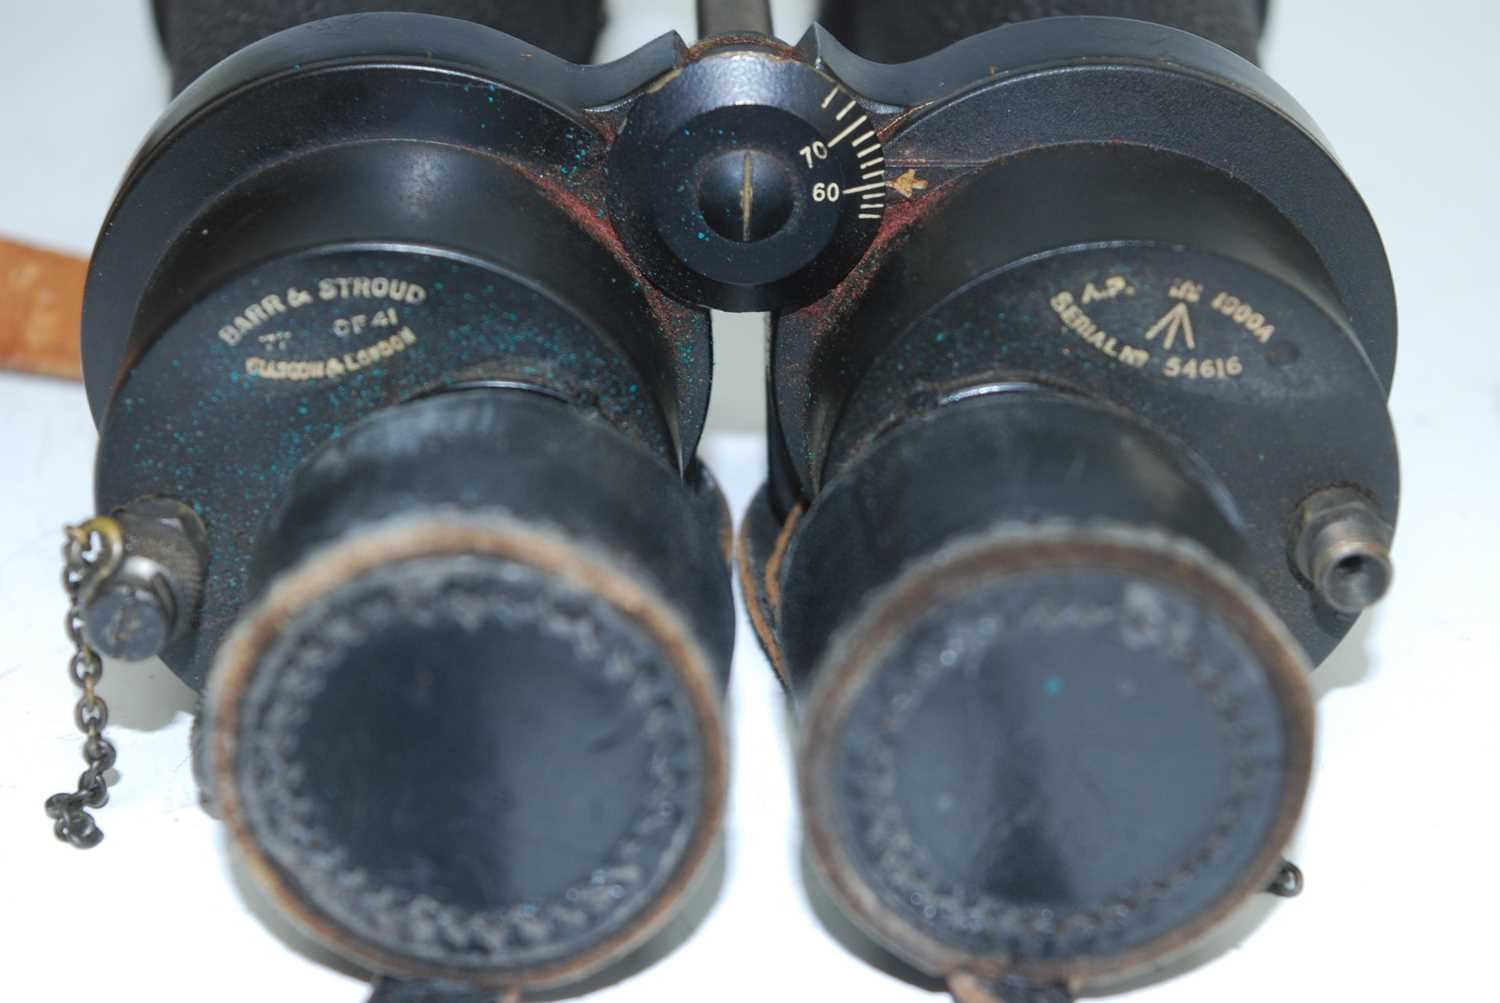 A pair of WW II Barr & Stoud 7x CF 41 Naval binoculars, with War Department mark A.P. 1900A serial - Image 2 of 3